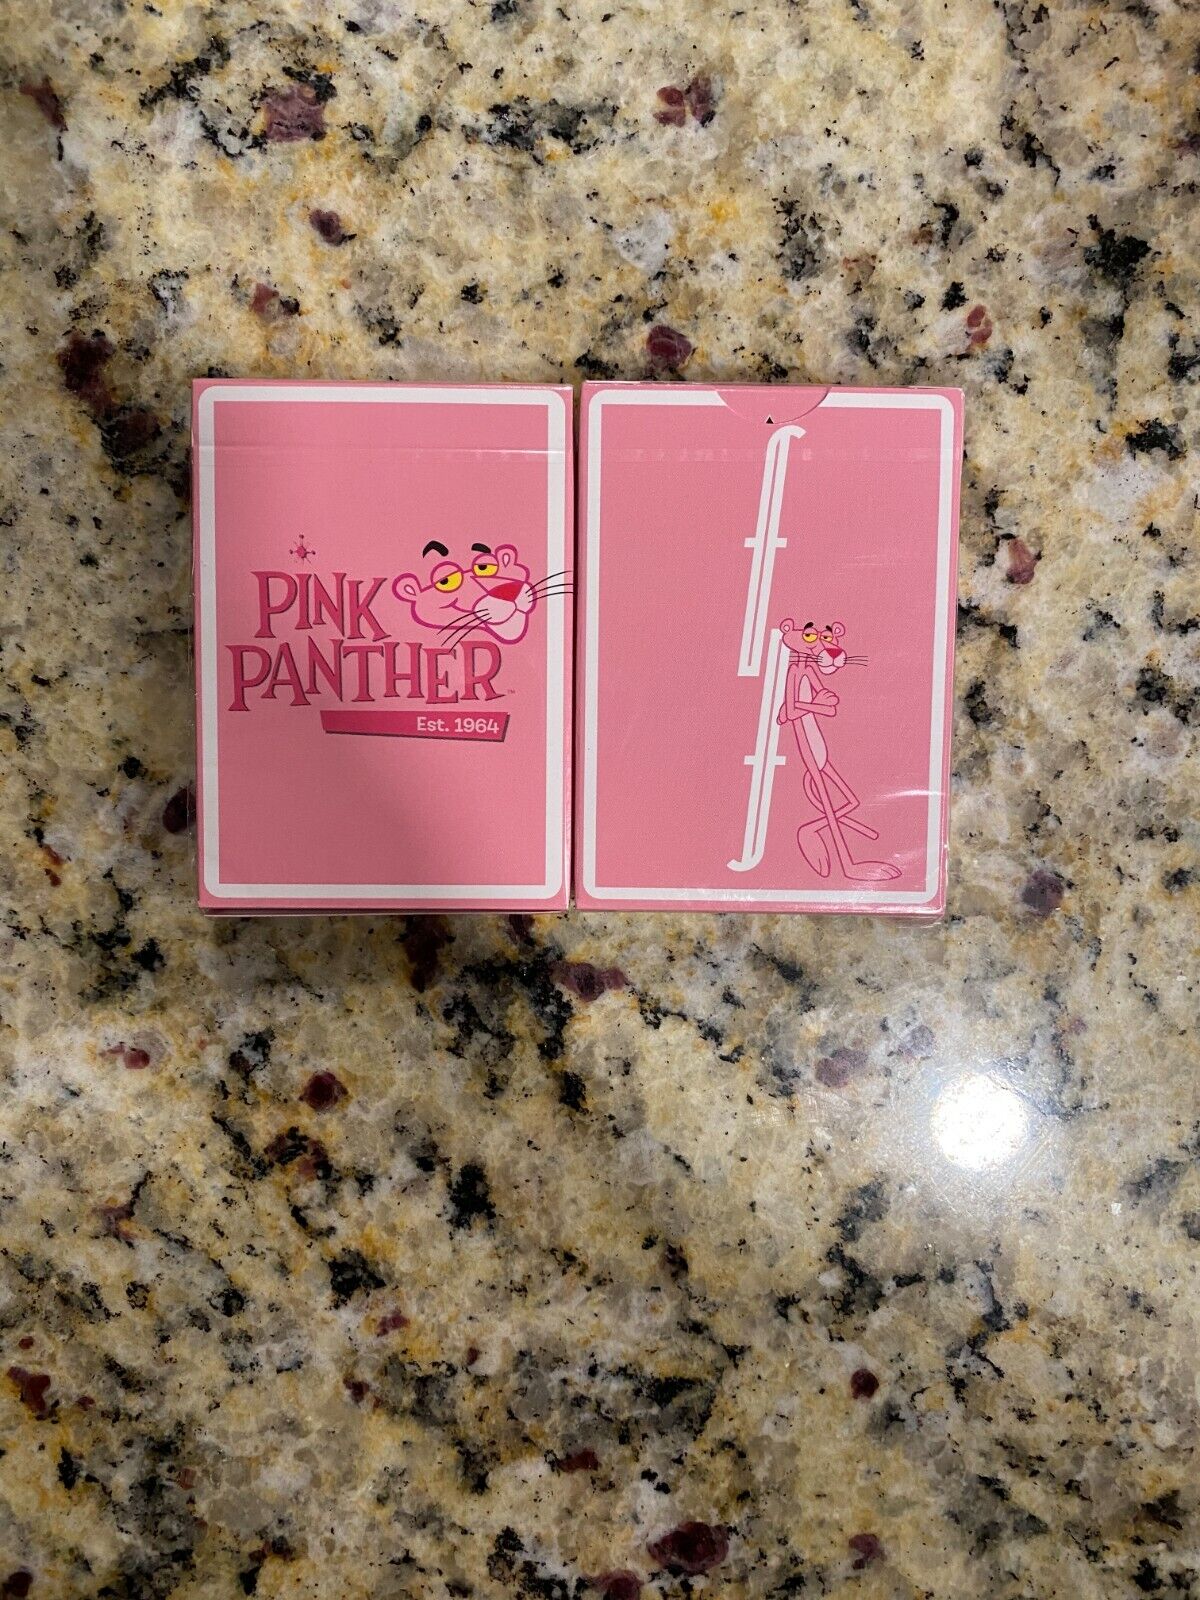 Fontaine Pink Panther Playing Cards - New - Sealed - 1 of 10,0000